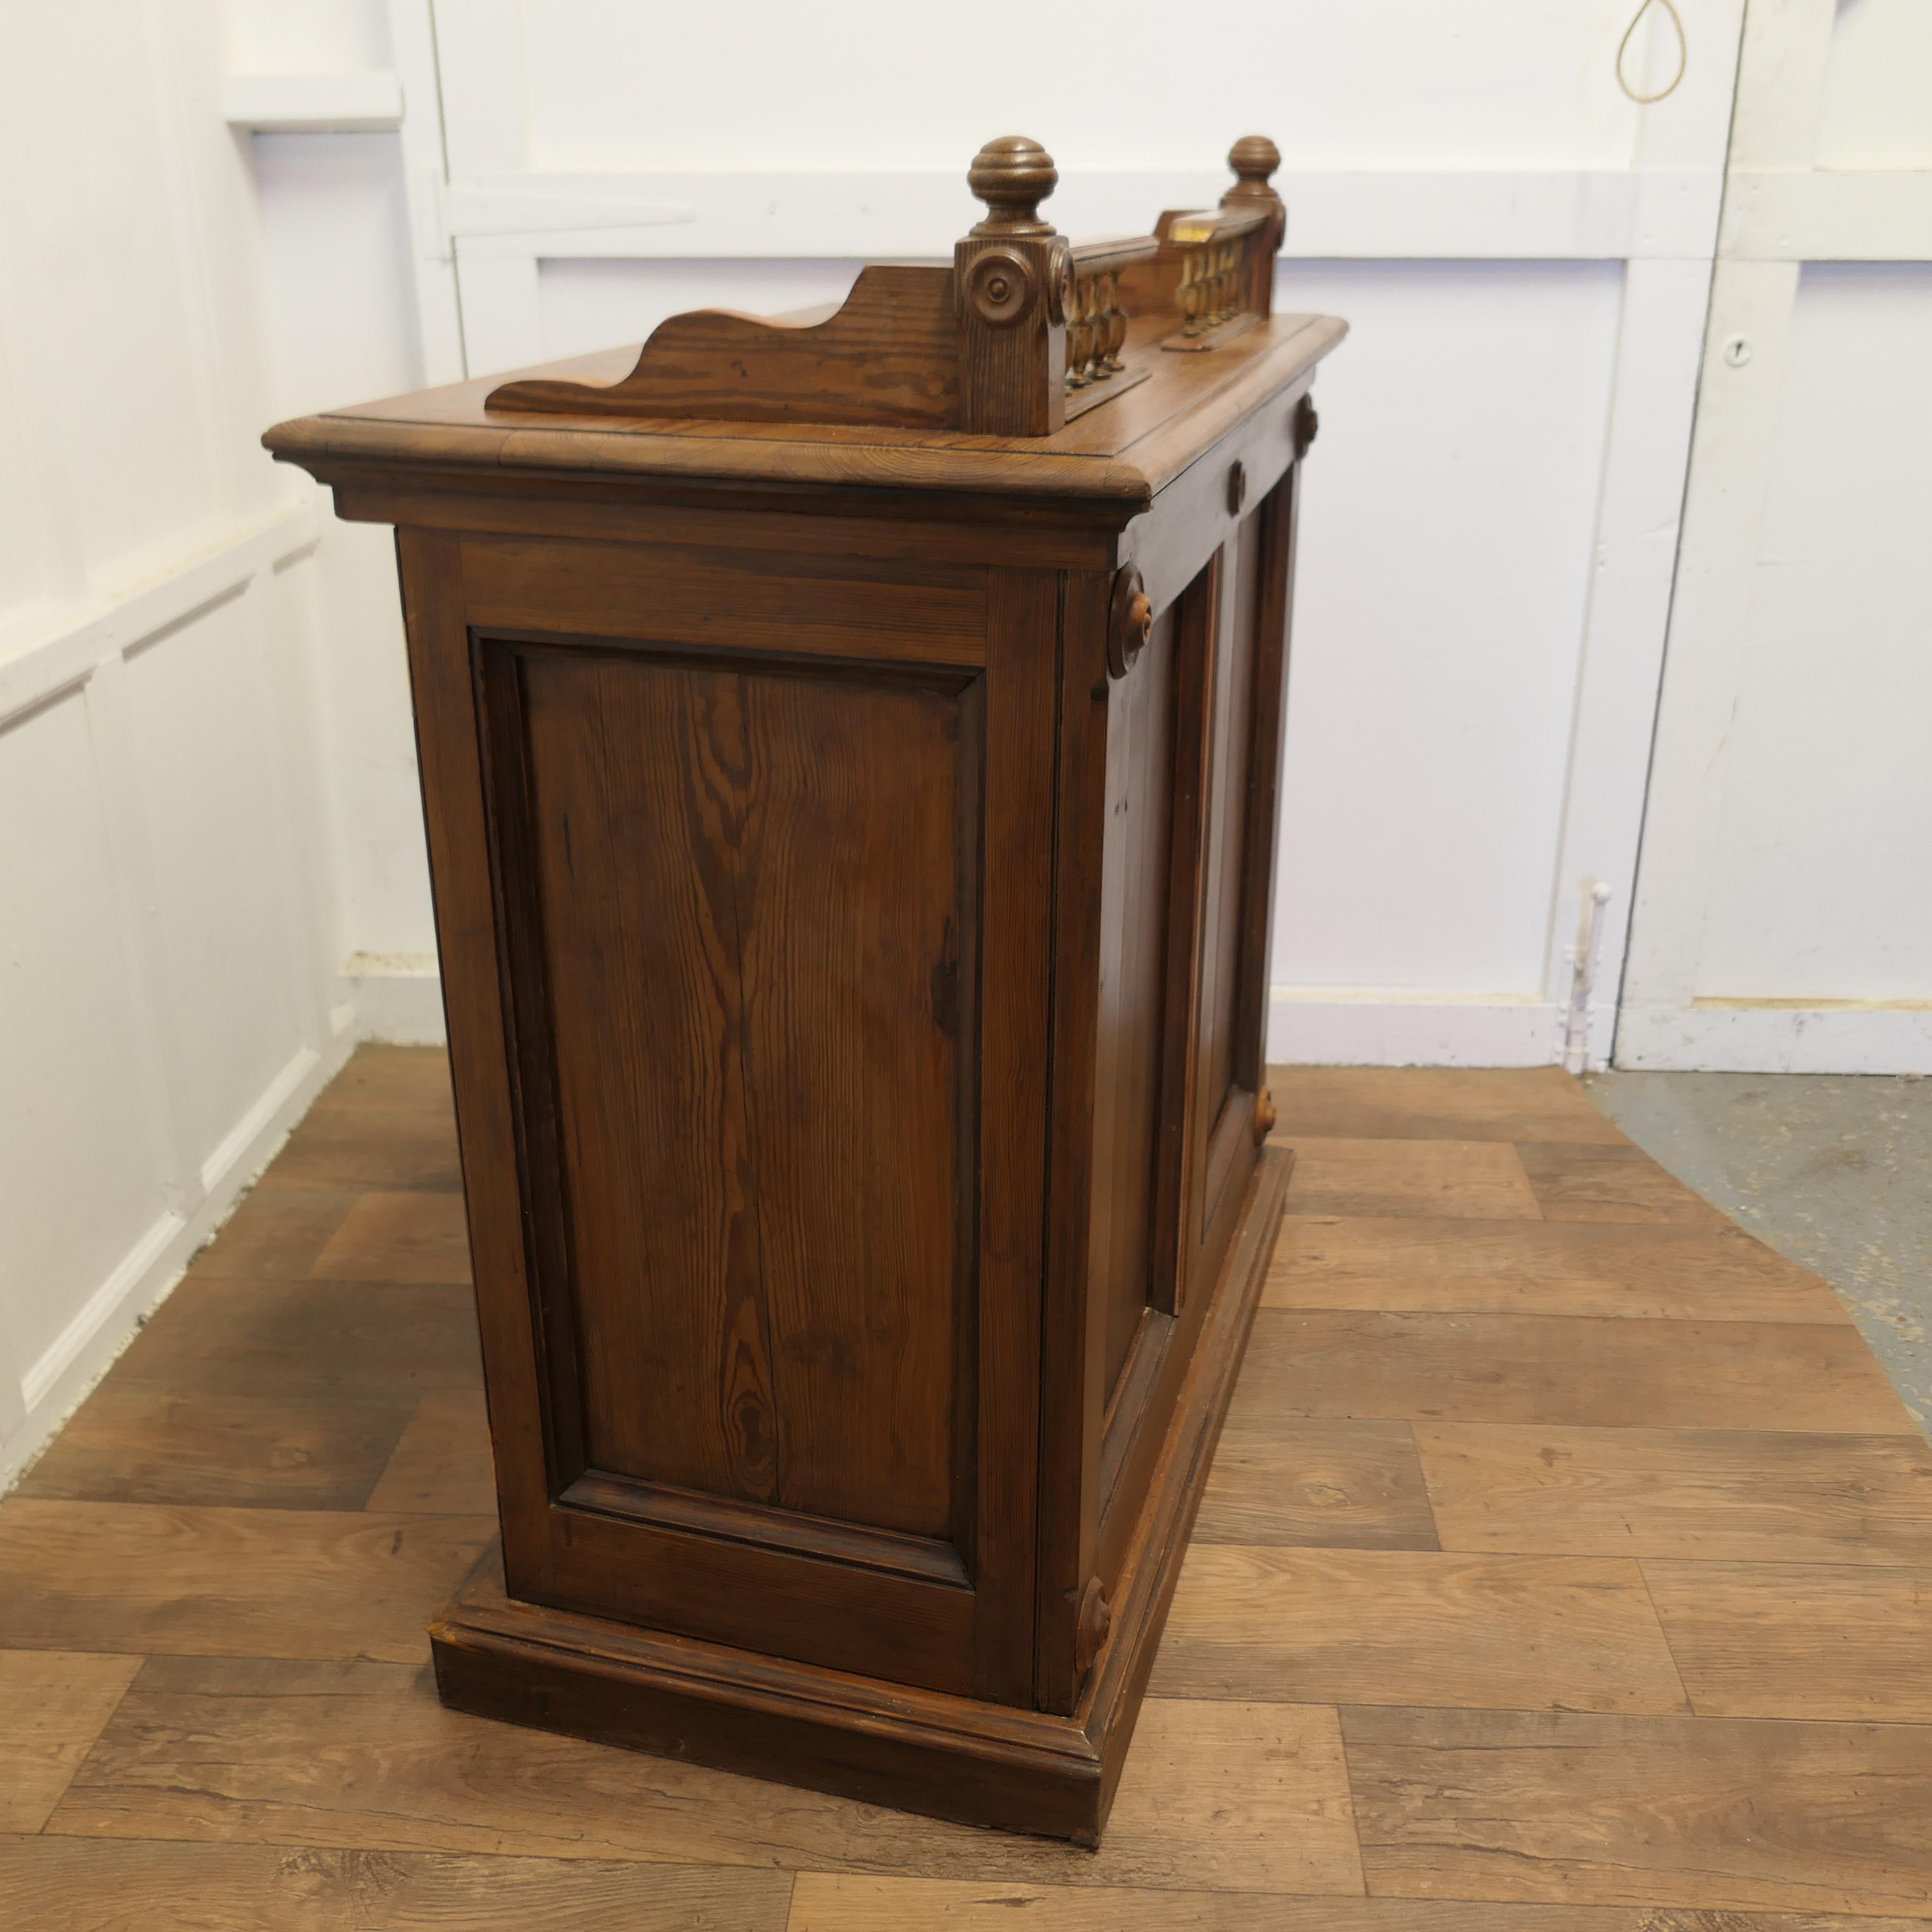 Late 19th Century Pitch Pine Hotel Restaurant Reception Hostess Greeting Station  For Sale